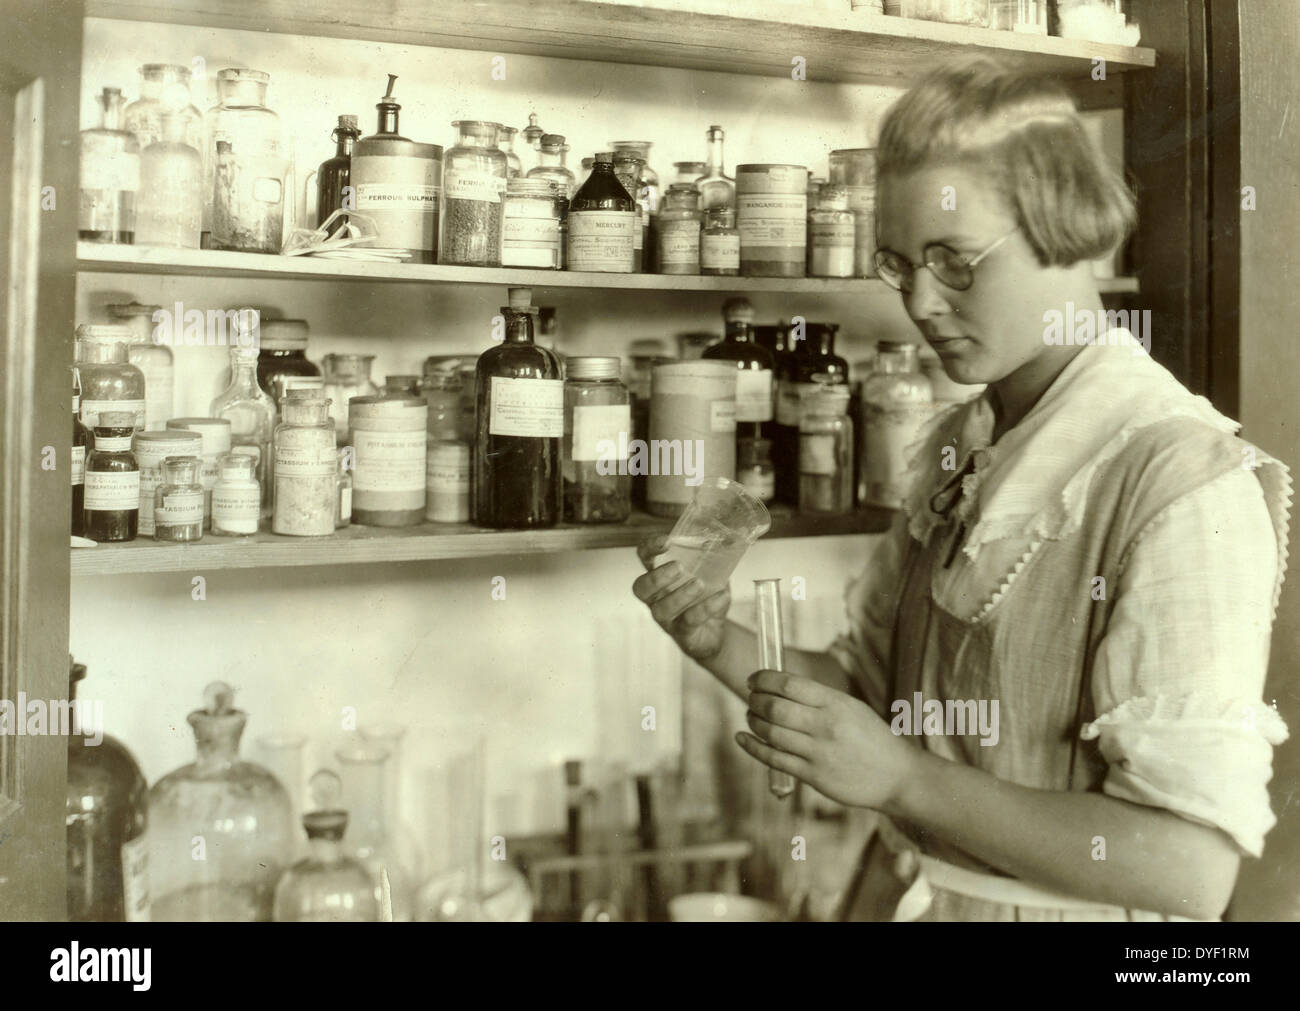 A Third year high school girl in the chemical laboratory, Greenbank Consolidated School, 1921. Pocahontas County, West Virginia Photo by Lewis W. Hine, 1874-1940, photographer Stock Photo